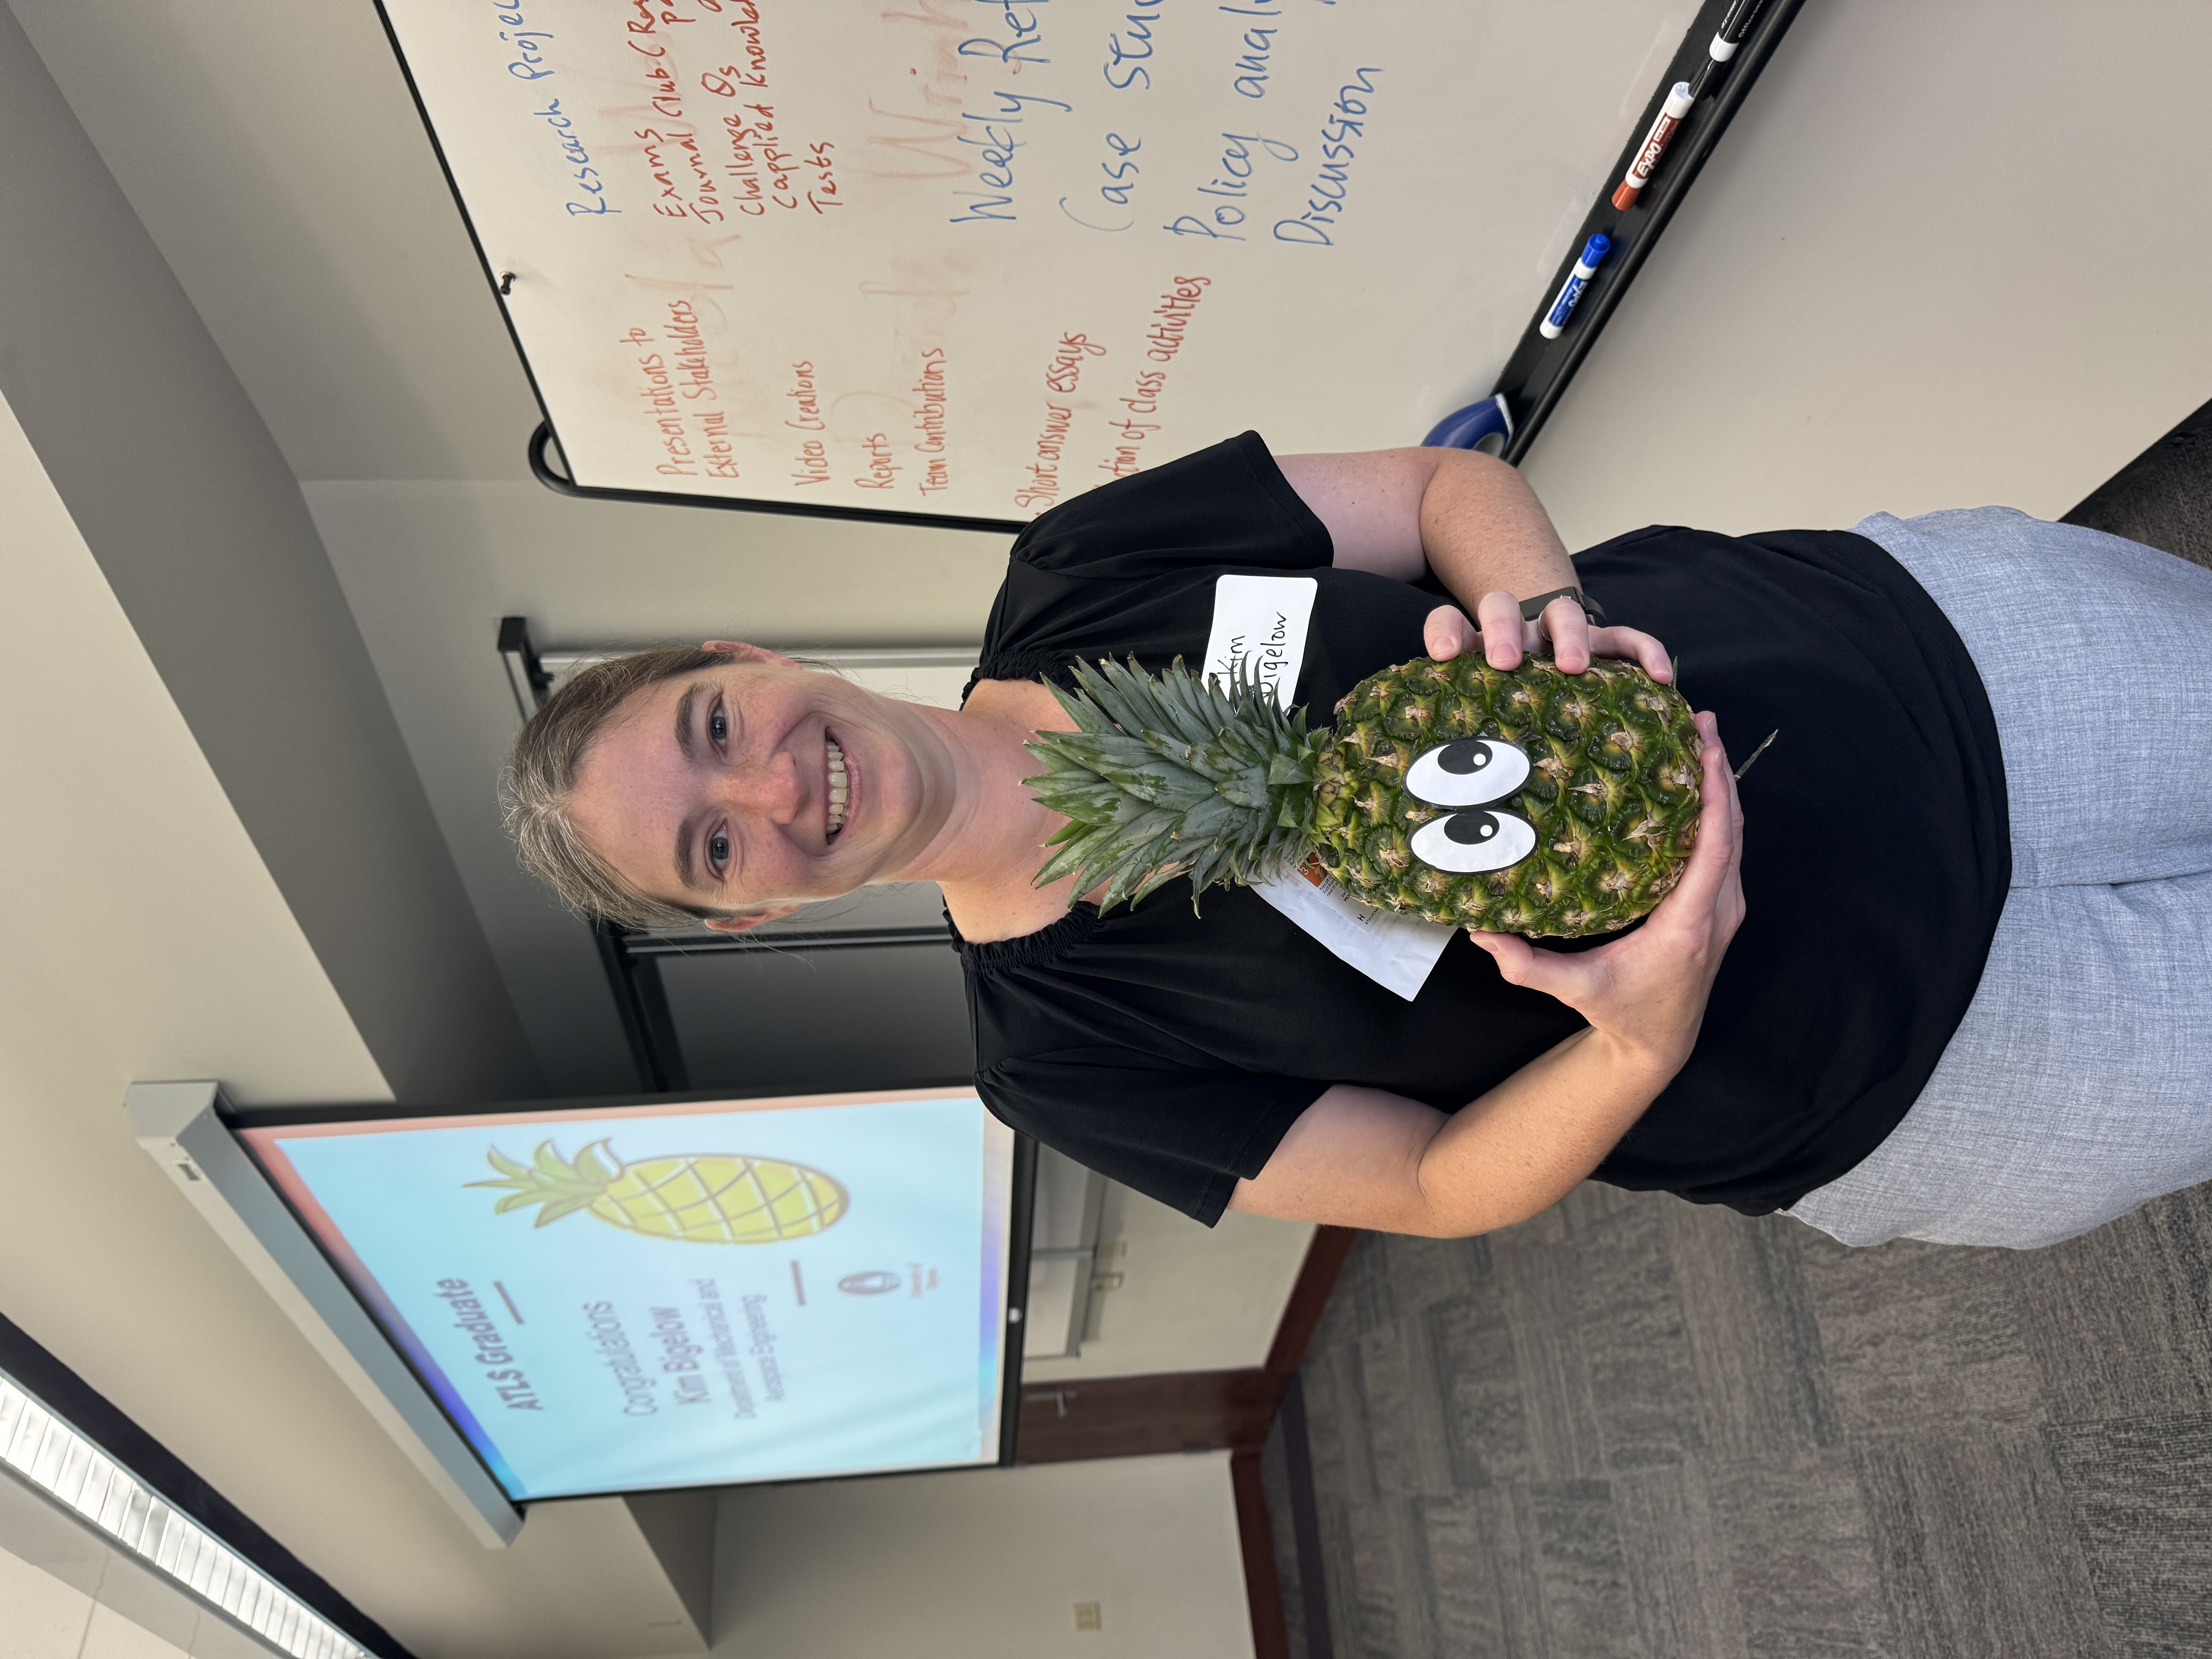 Faculty member Kim Bigelow poses with a pineapple to signify her graduation from ATLS.